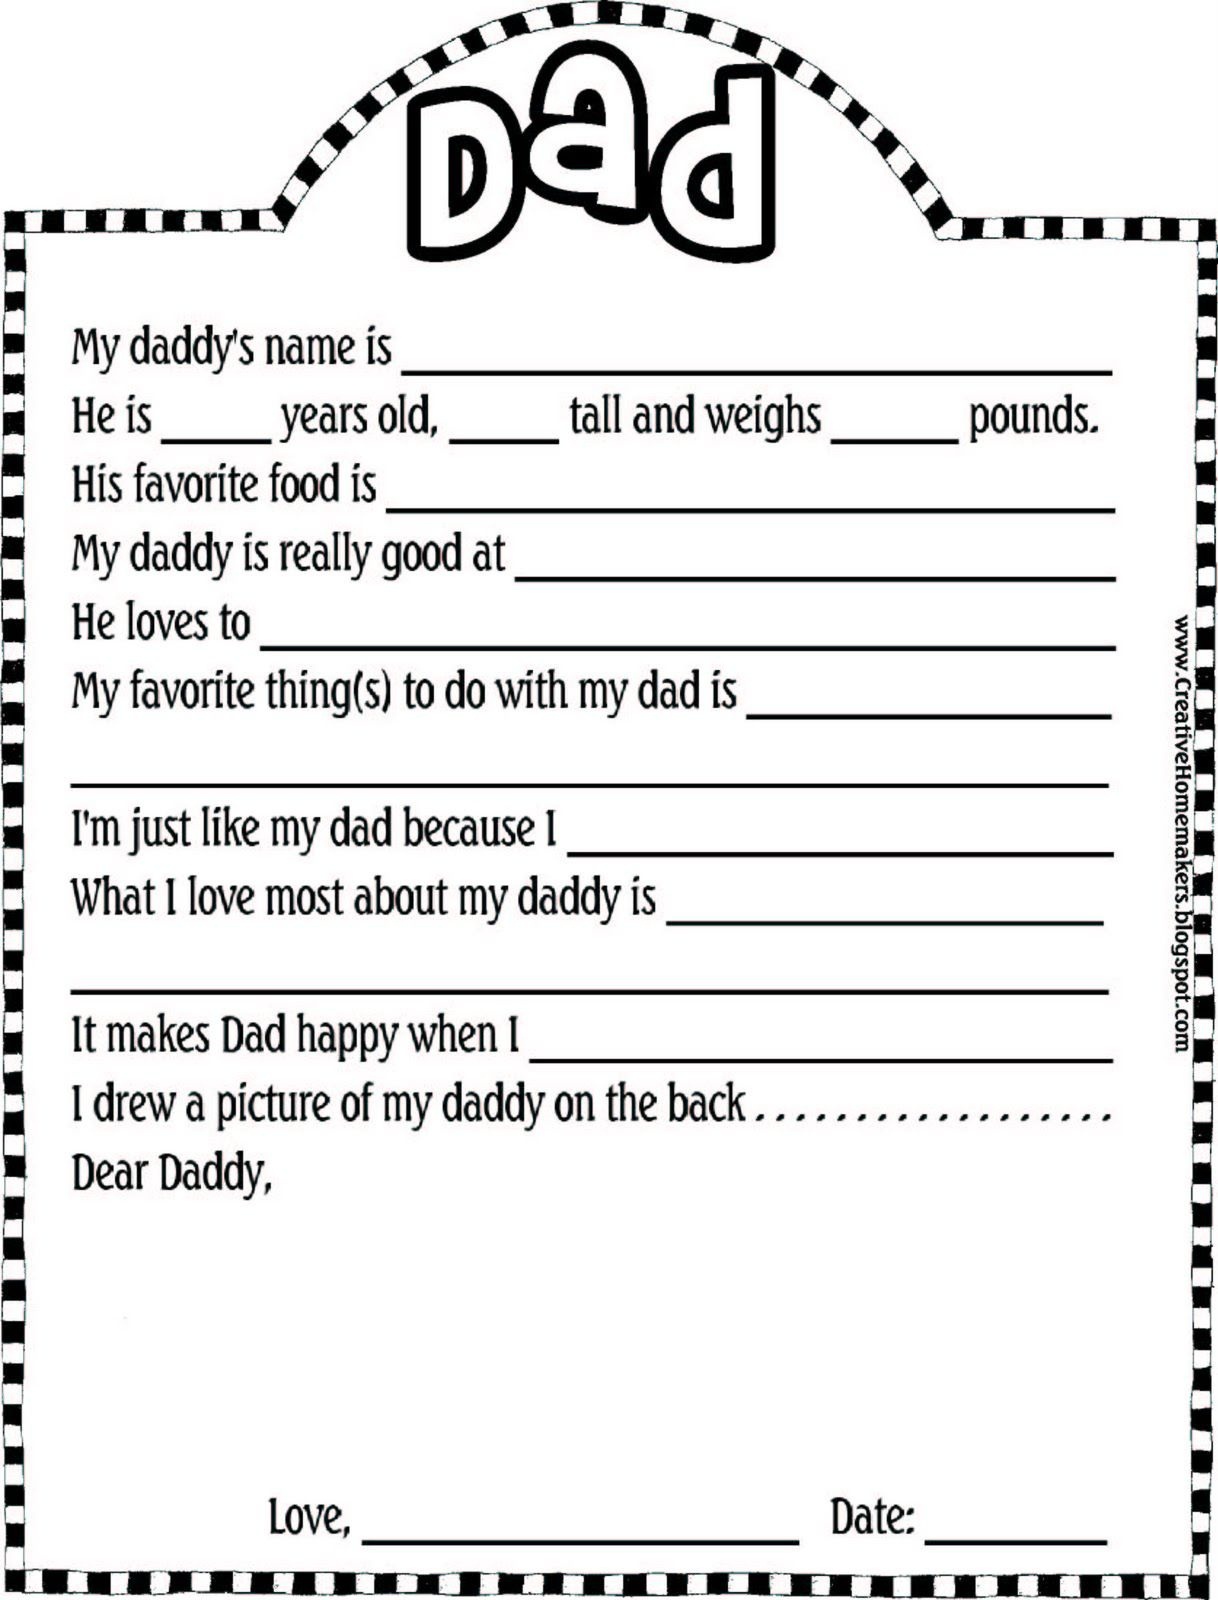 Free Father's Day Printable From The Creative Homemaker | Father's - Free Preschool Fathers Day Printables